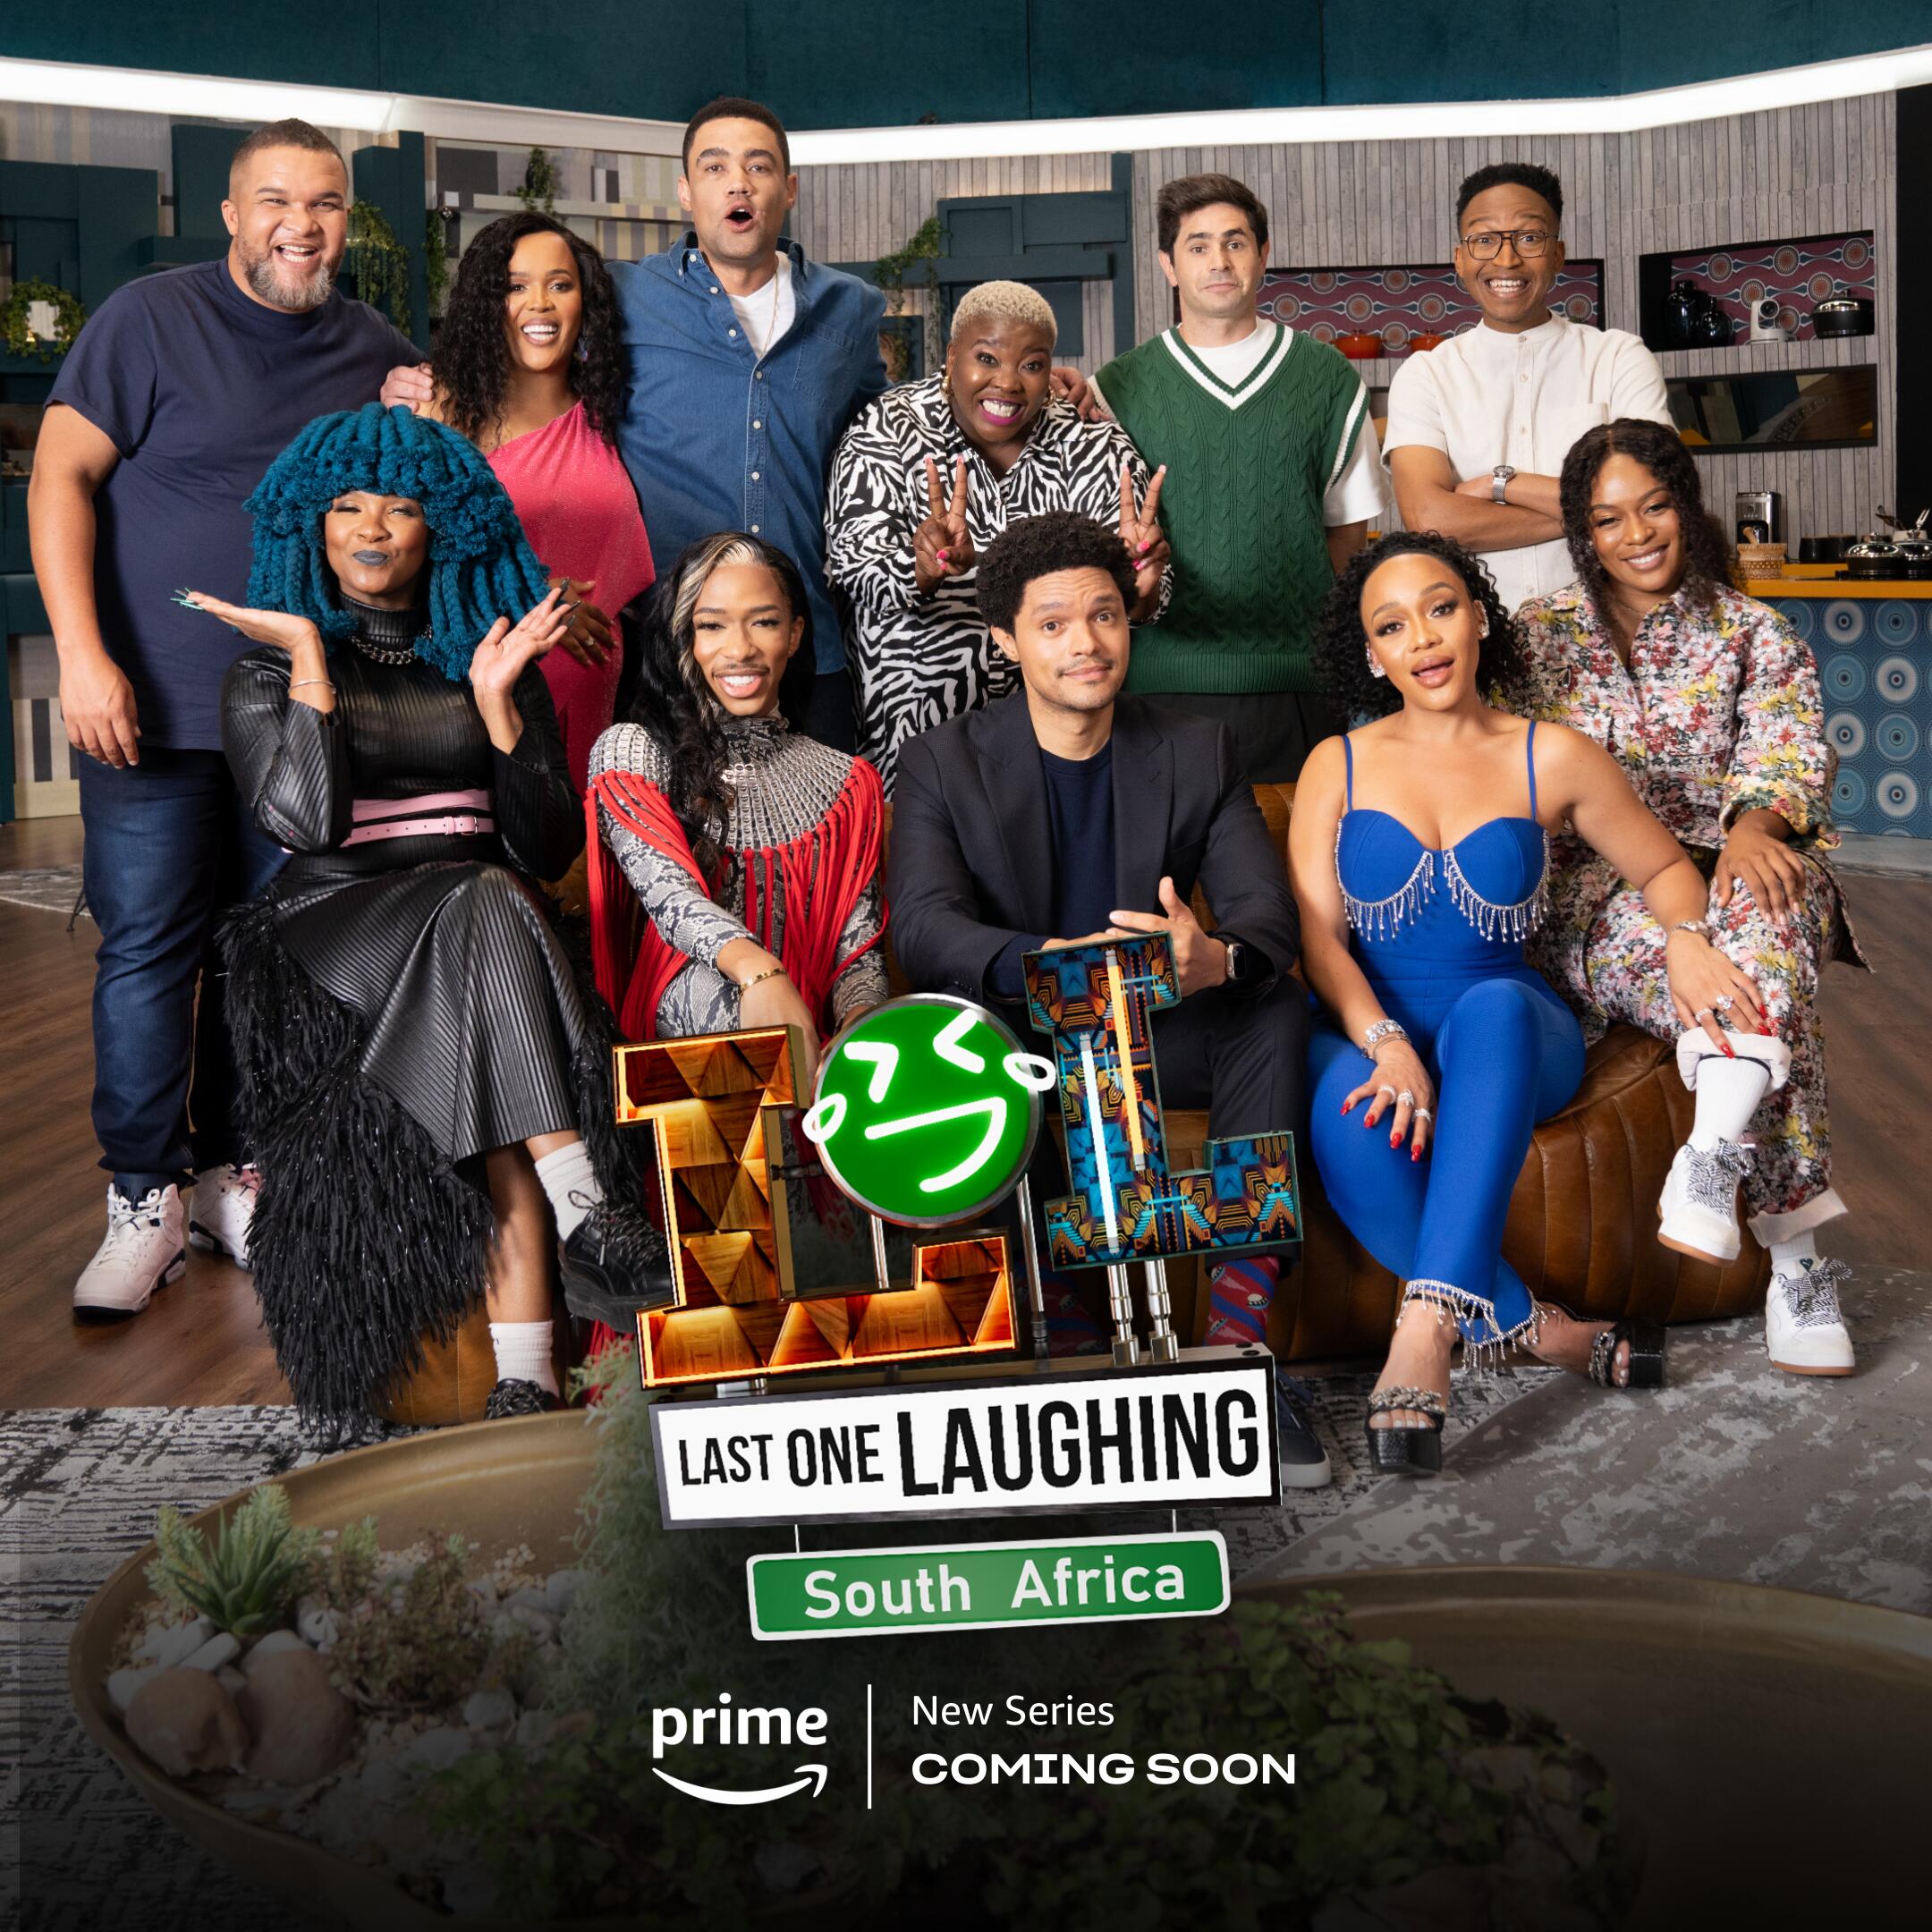 Trevor Noah to Host Amazon Prime's Comedy Series, “LOL: Last One Laughing South Africa” - Afrocritik